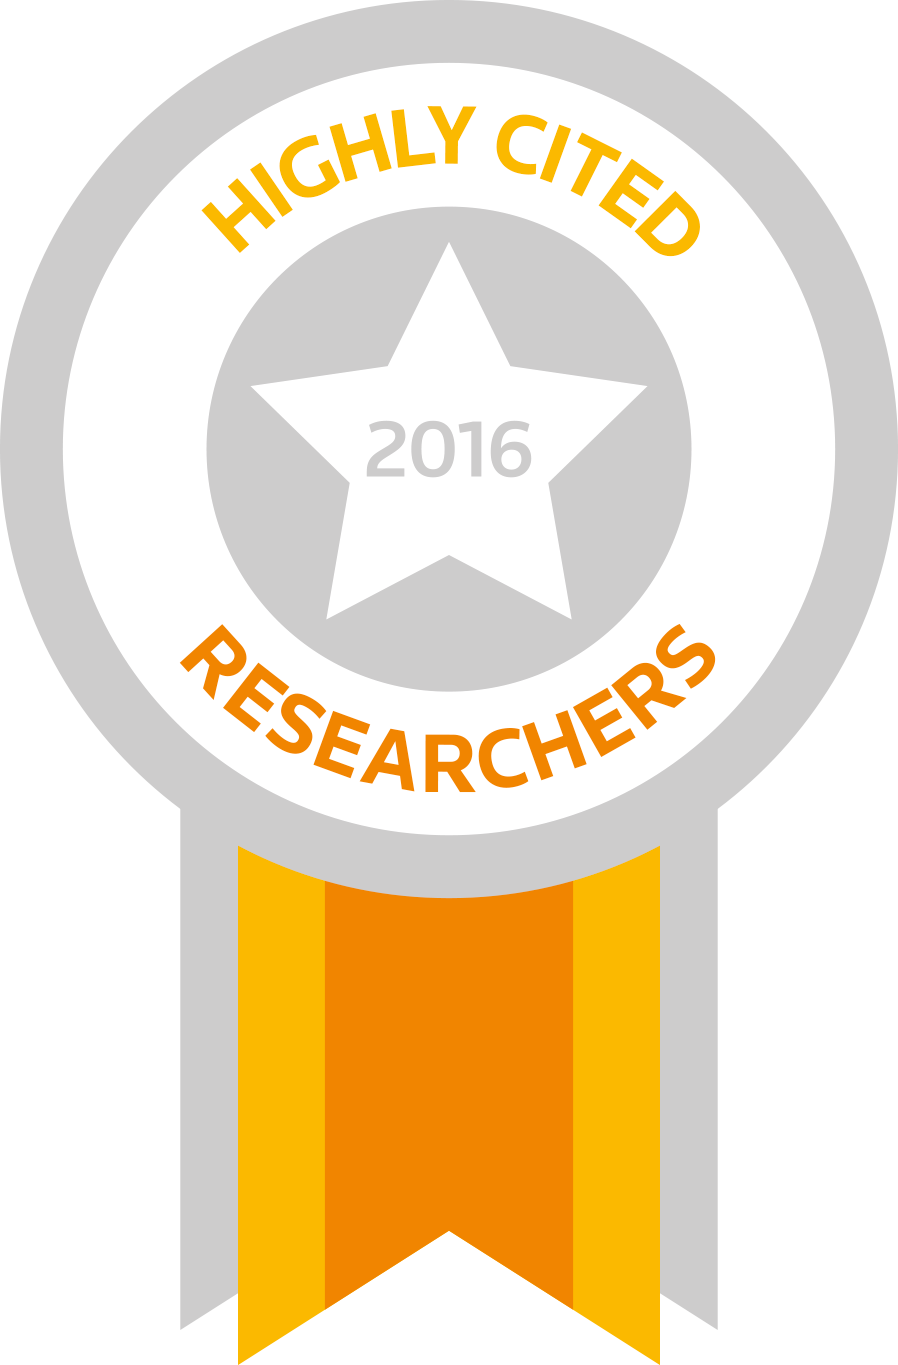 highly cited researcher